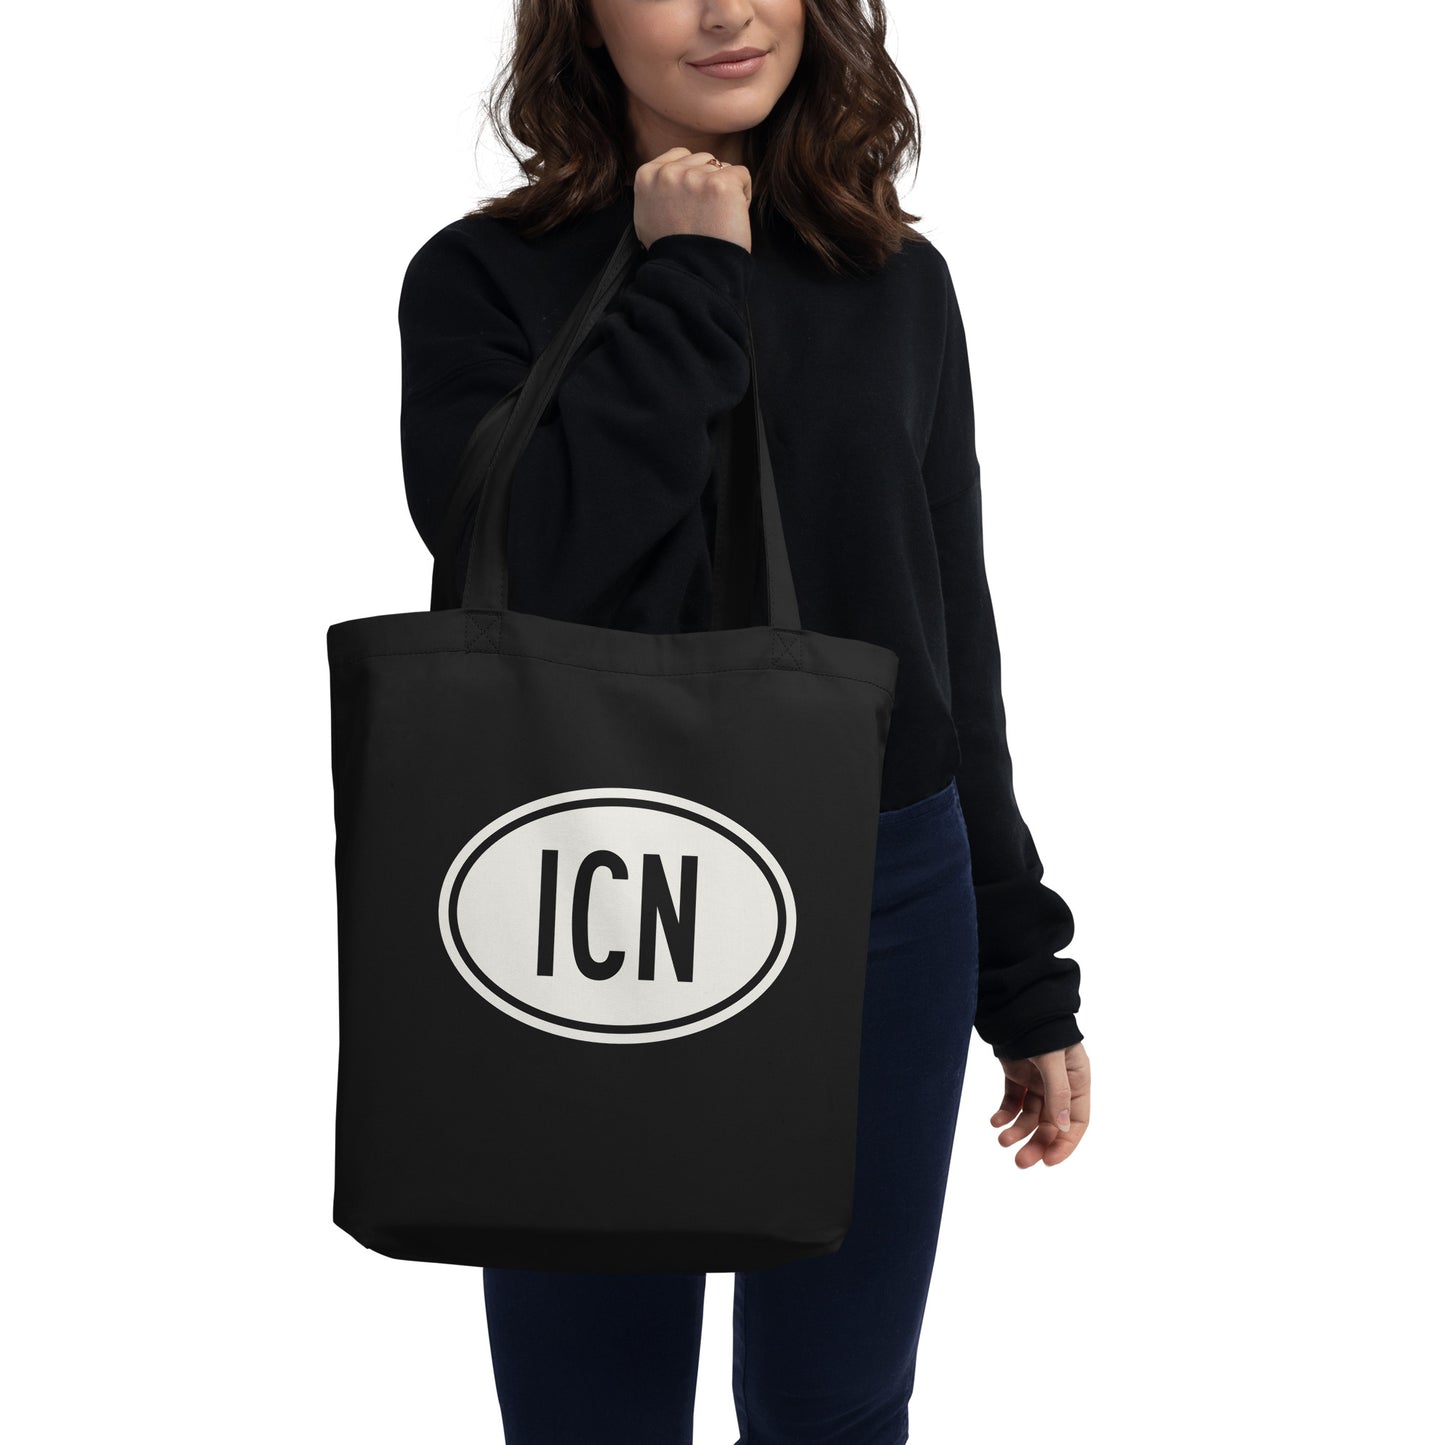 Unique Travel Gift Organic Tote - White Oval • ICN Seoul • YHM Designs - Image 03